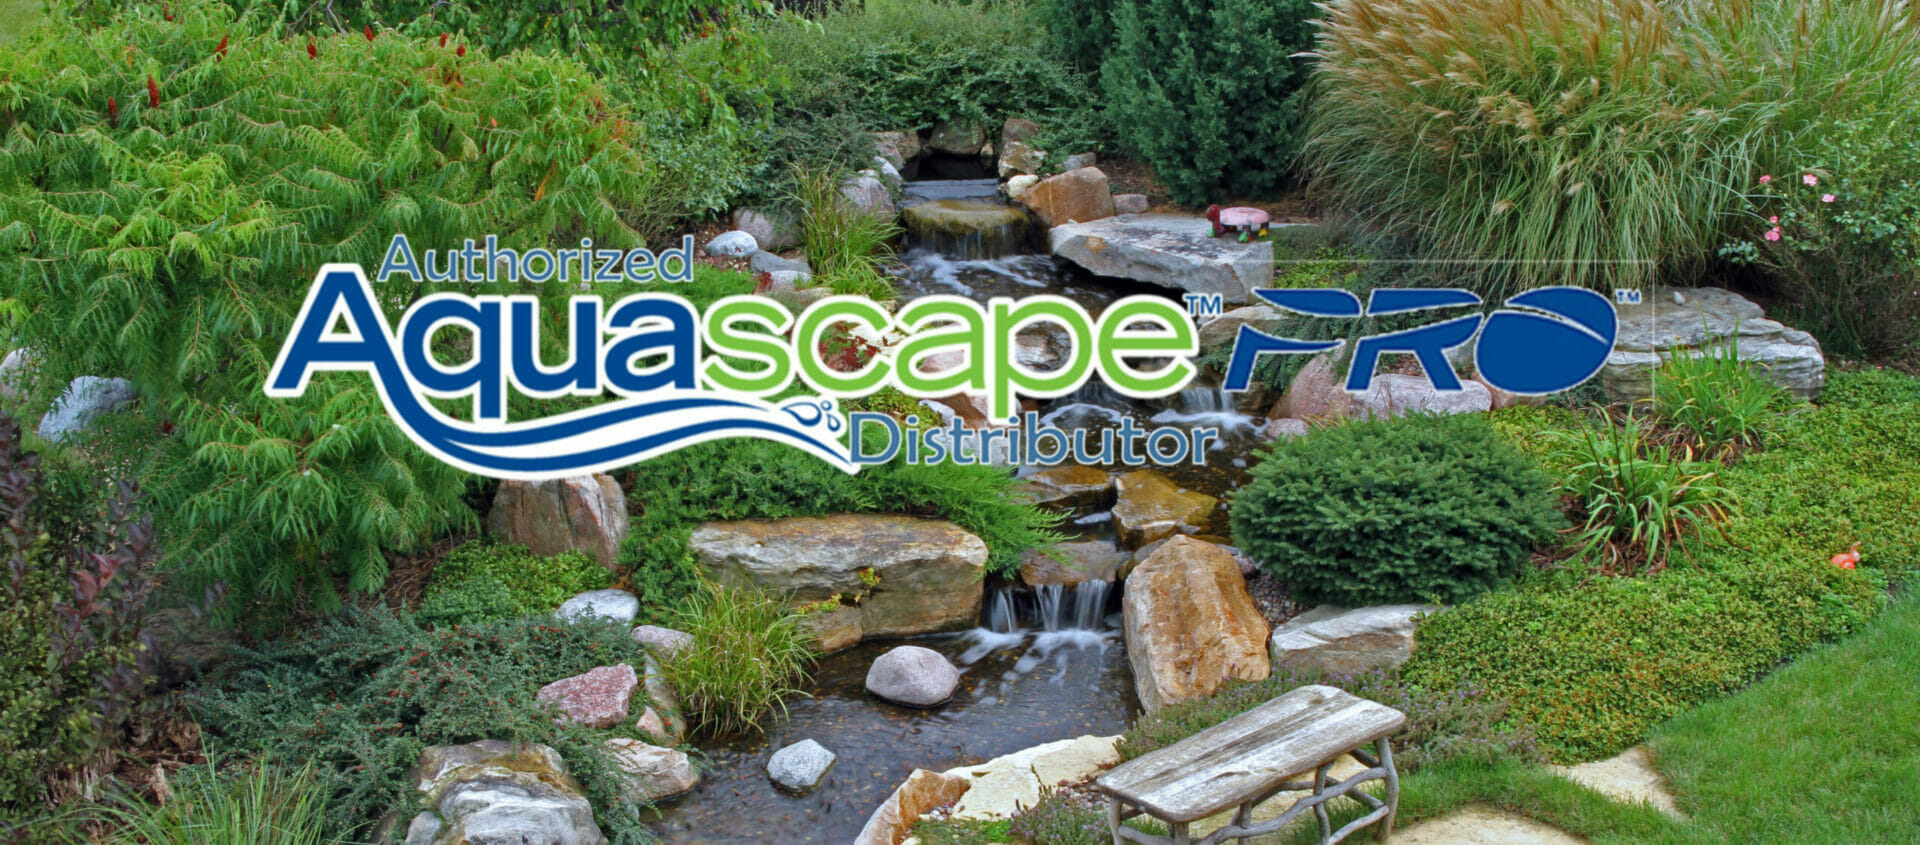 Aquascapes pondless waterfall with logo